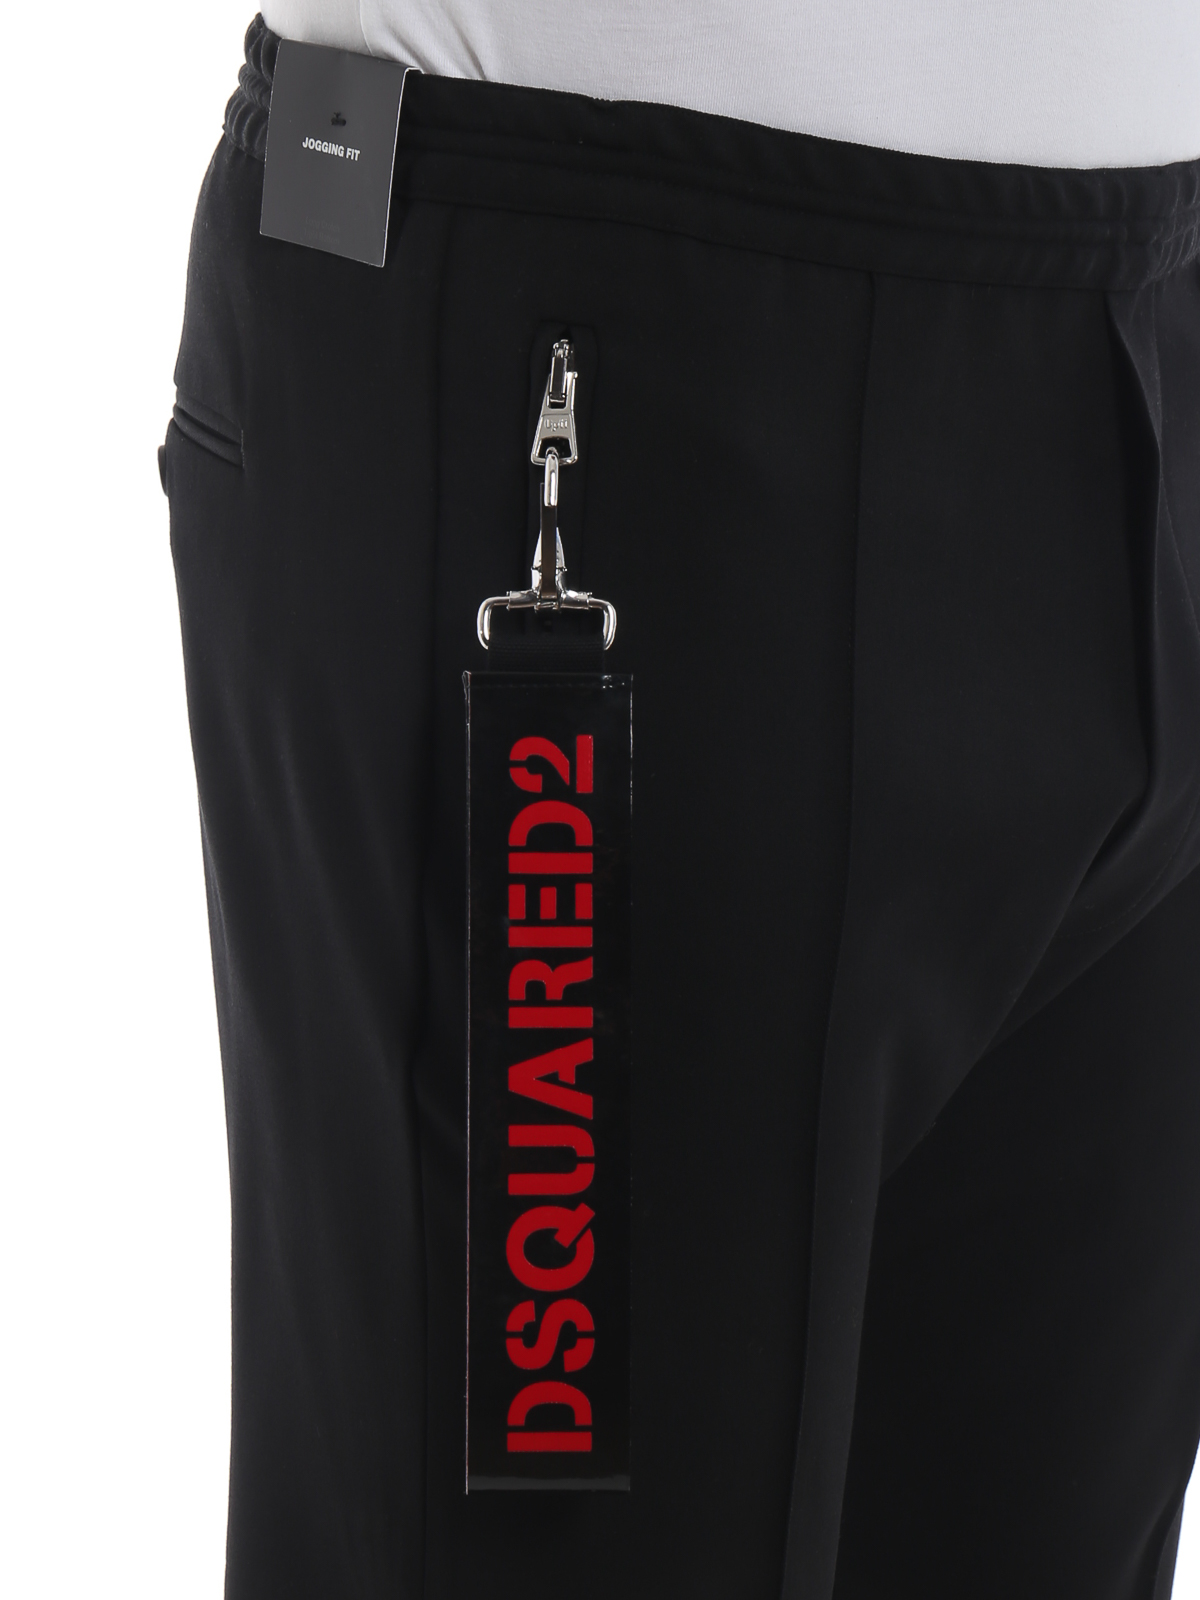 dsquared2 jogging trousers